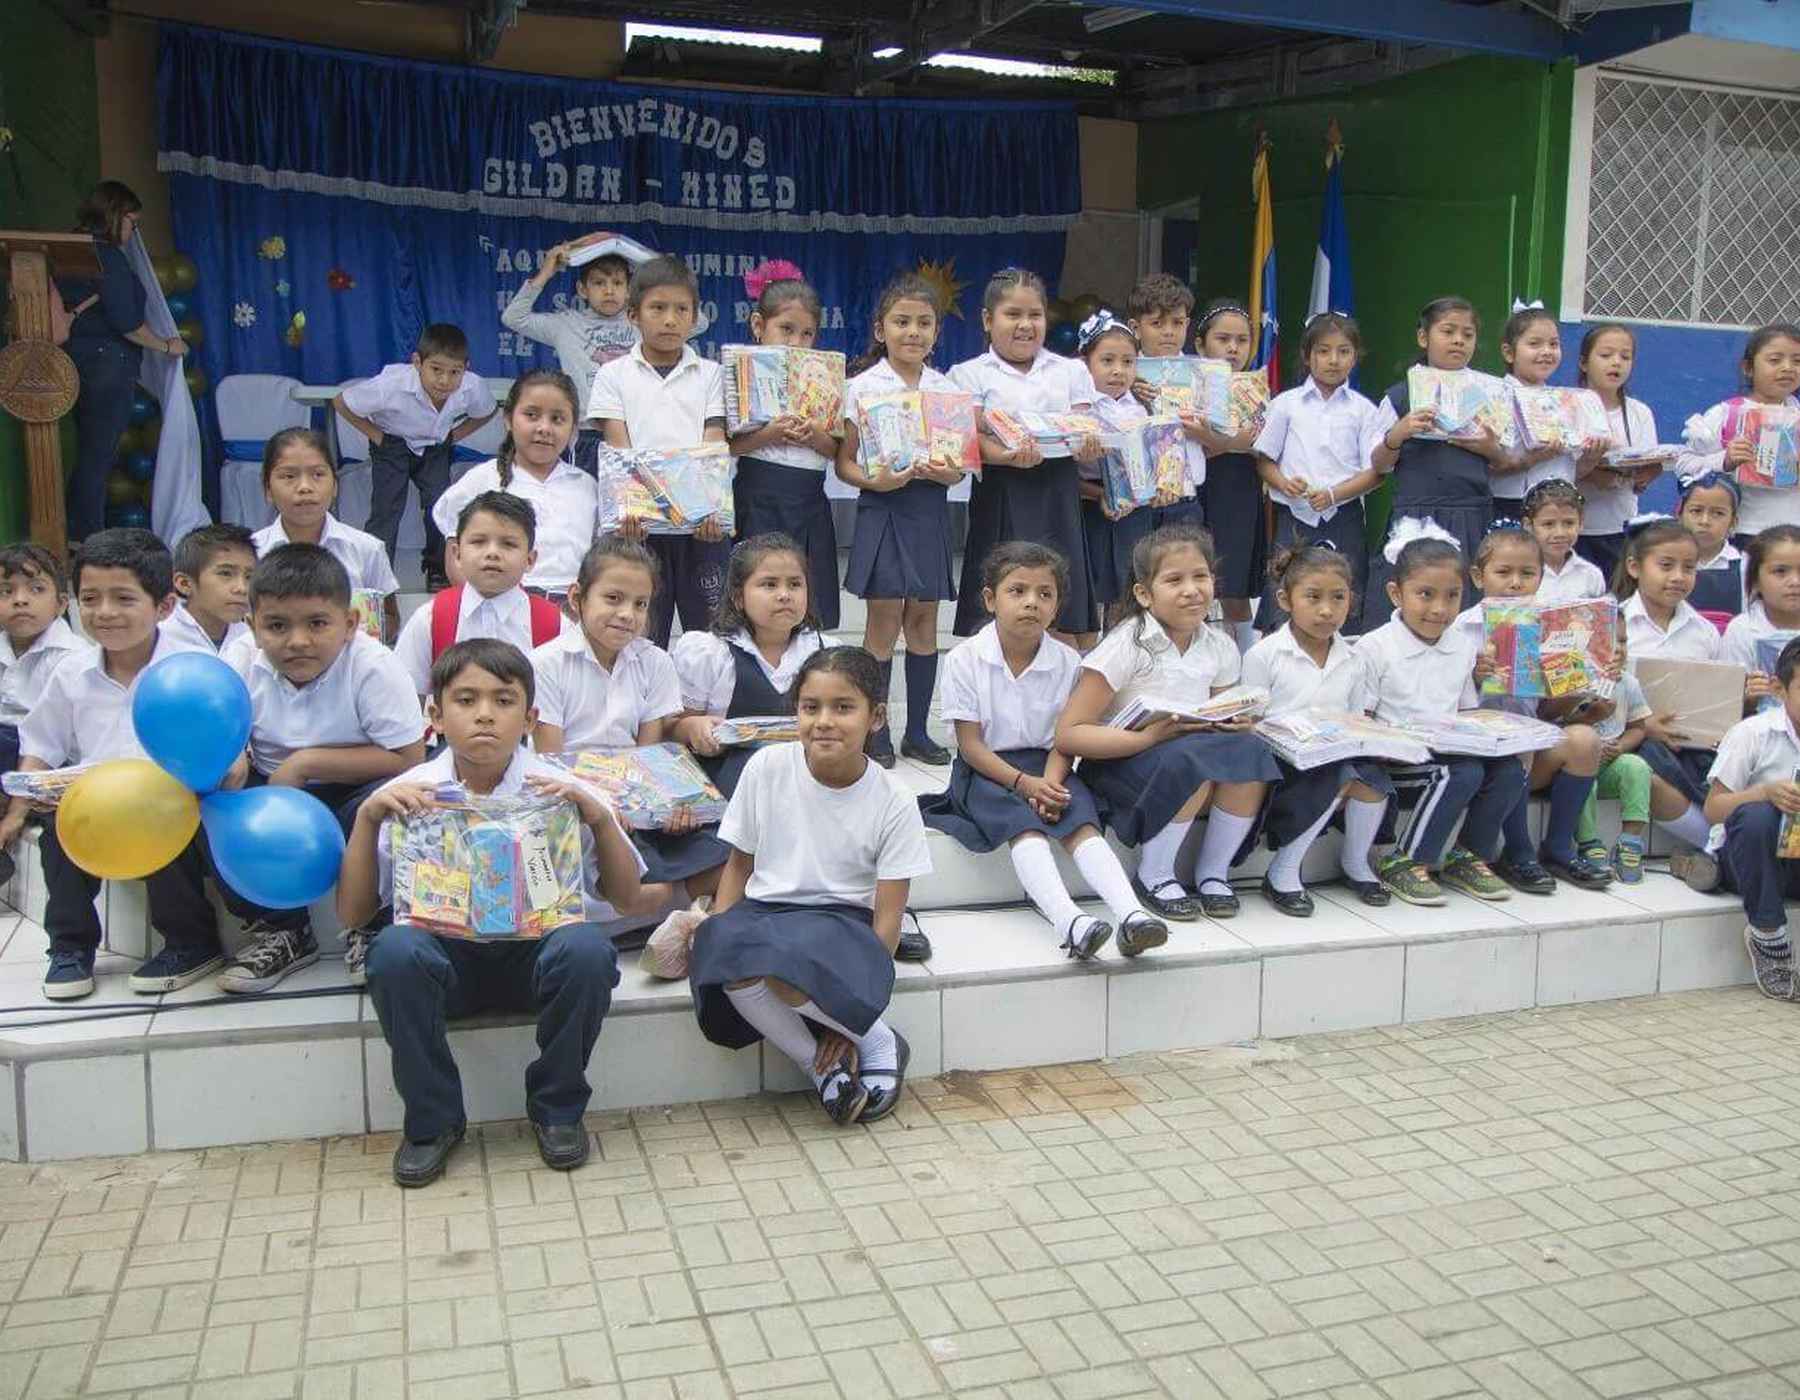 Children in Nicaragua are wearing school uniforms and smiling while holding school supplies.